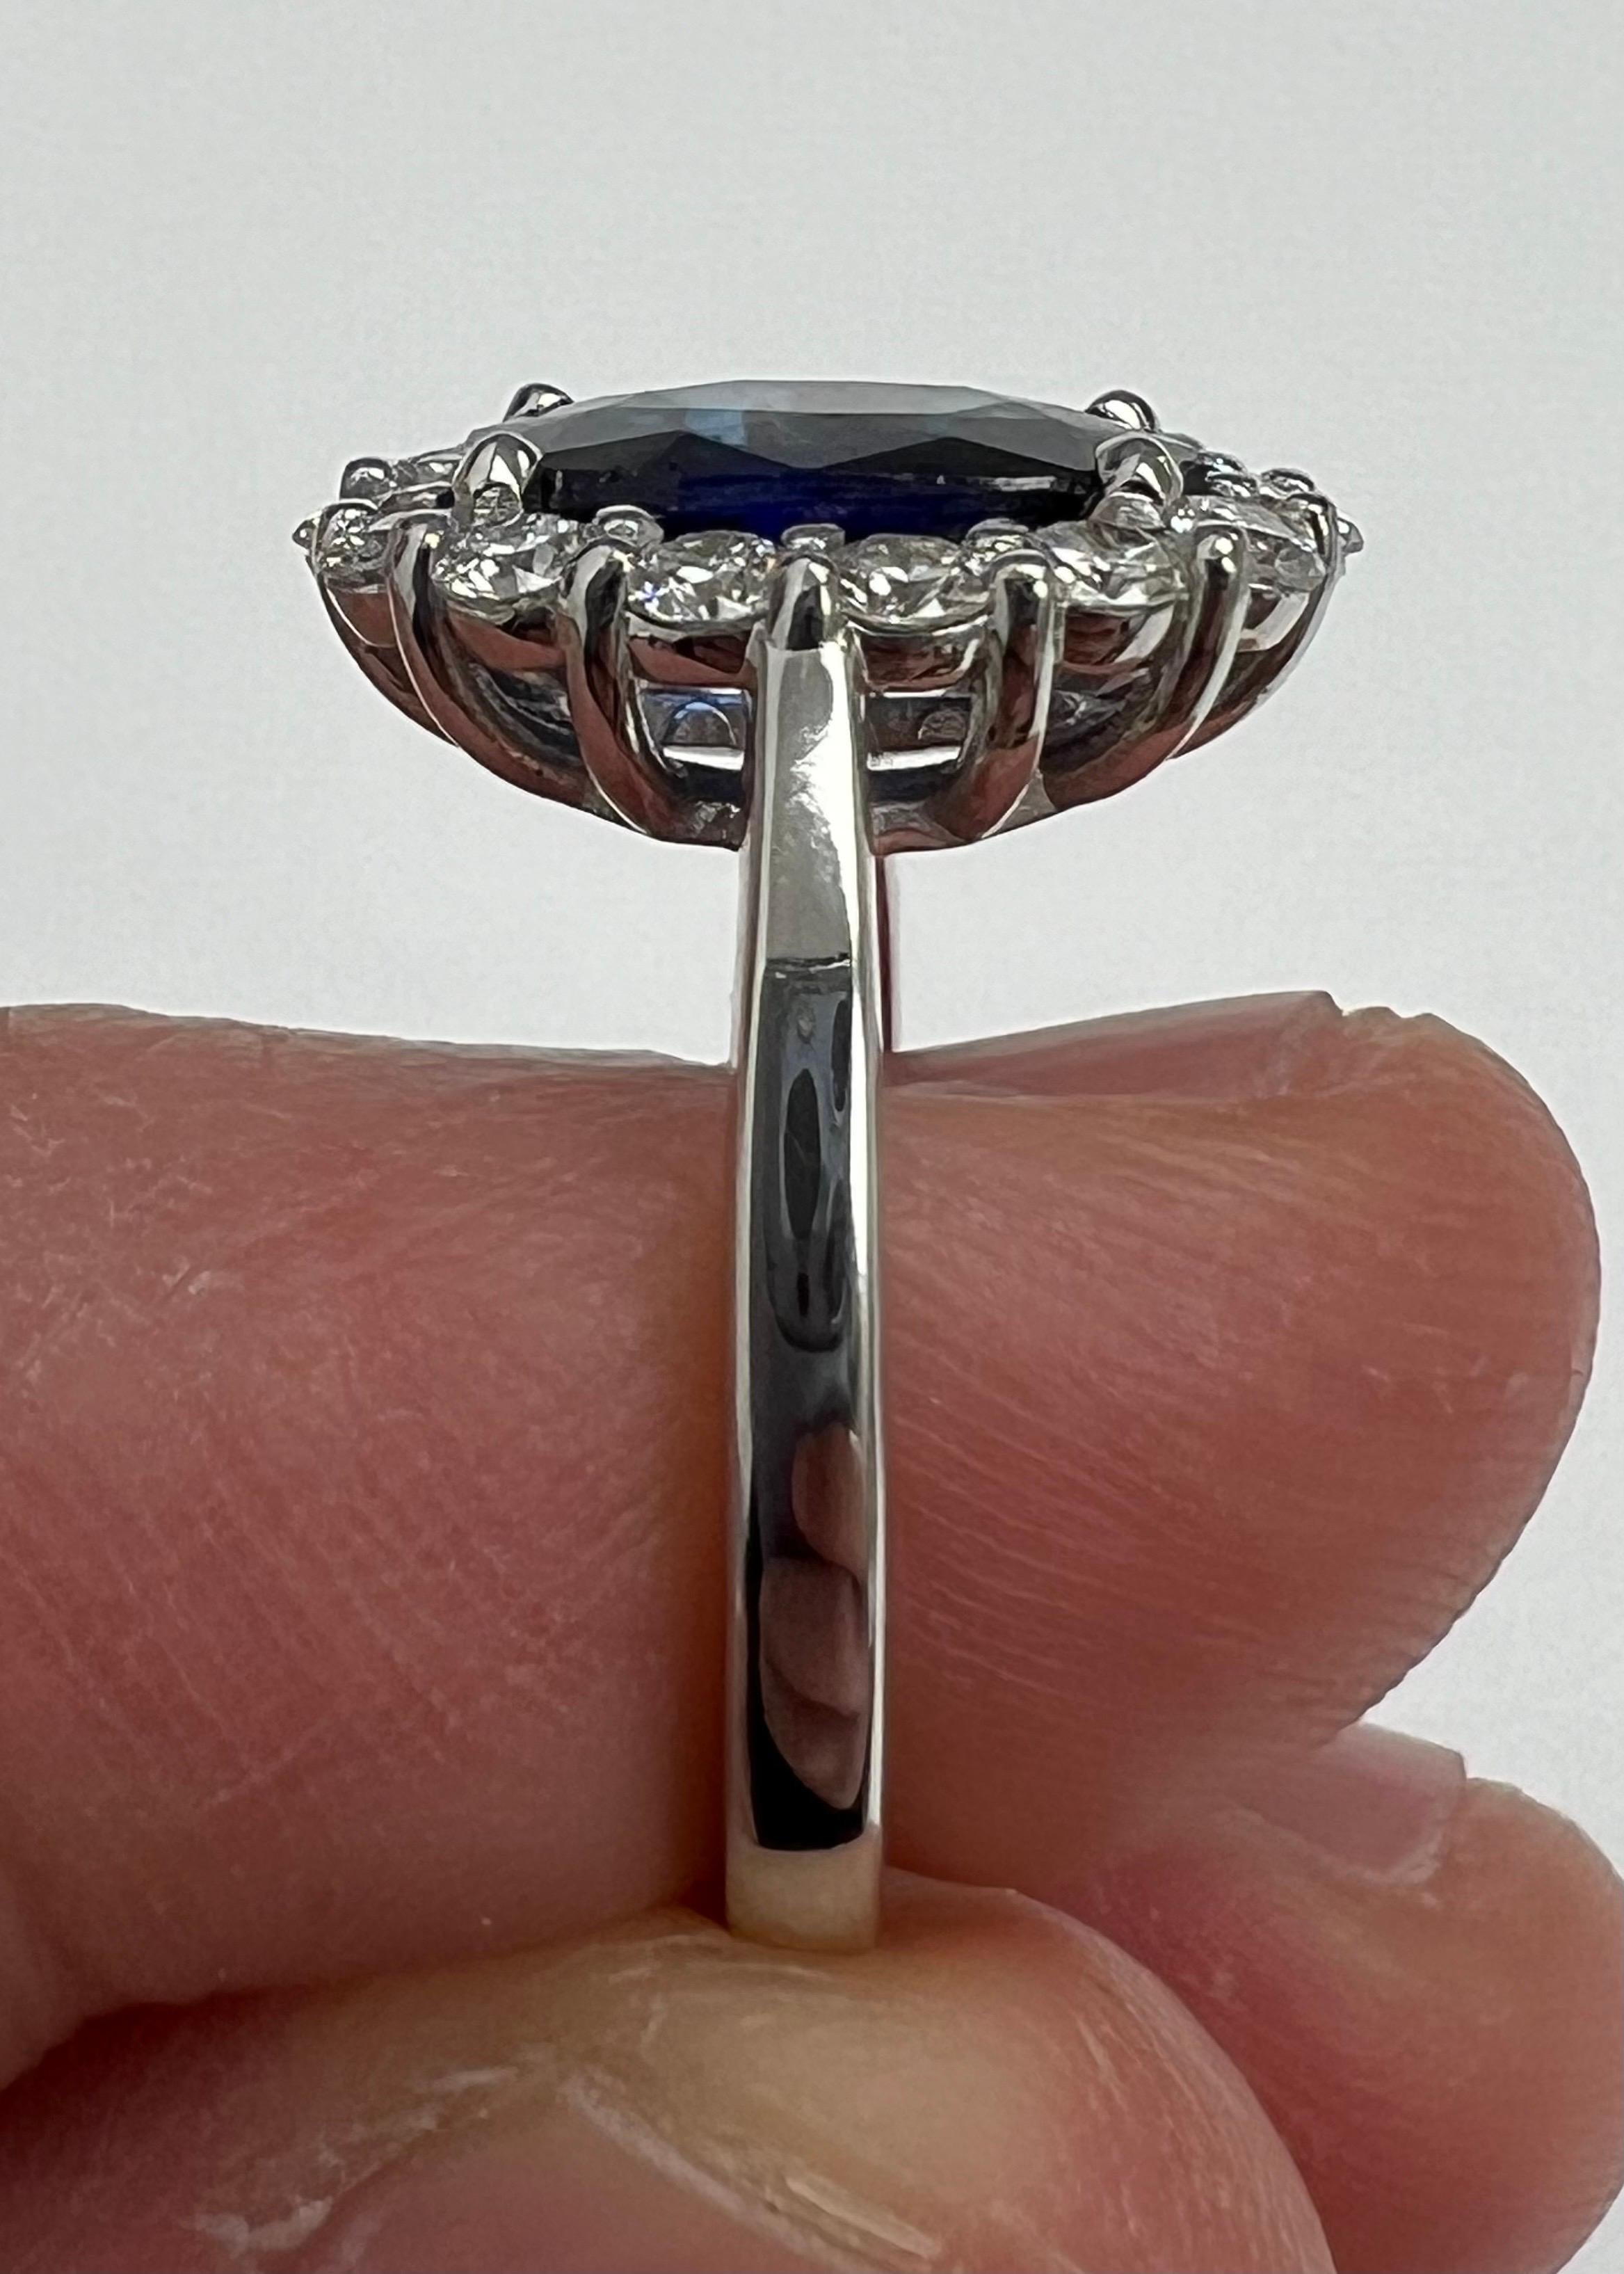 Natural Blue Sapphire Diamond Ring in 18k White Gold - Lady D Style For Sale 1